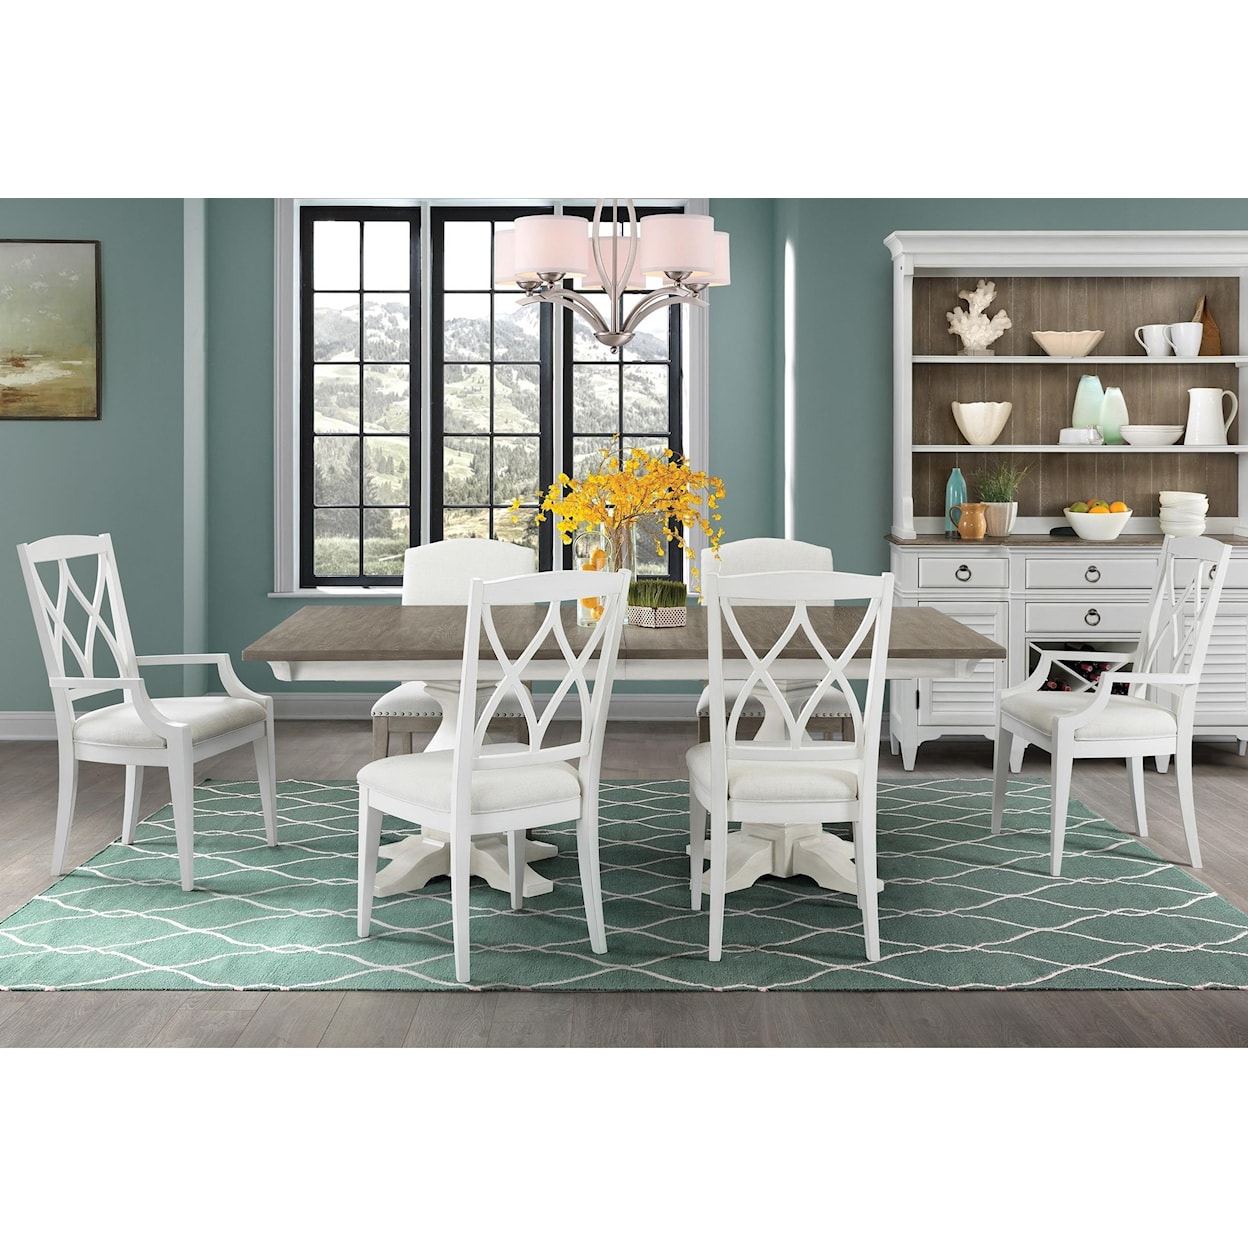 Riverside Furniture Myra 7 Piece Table and Chair Set